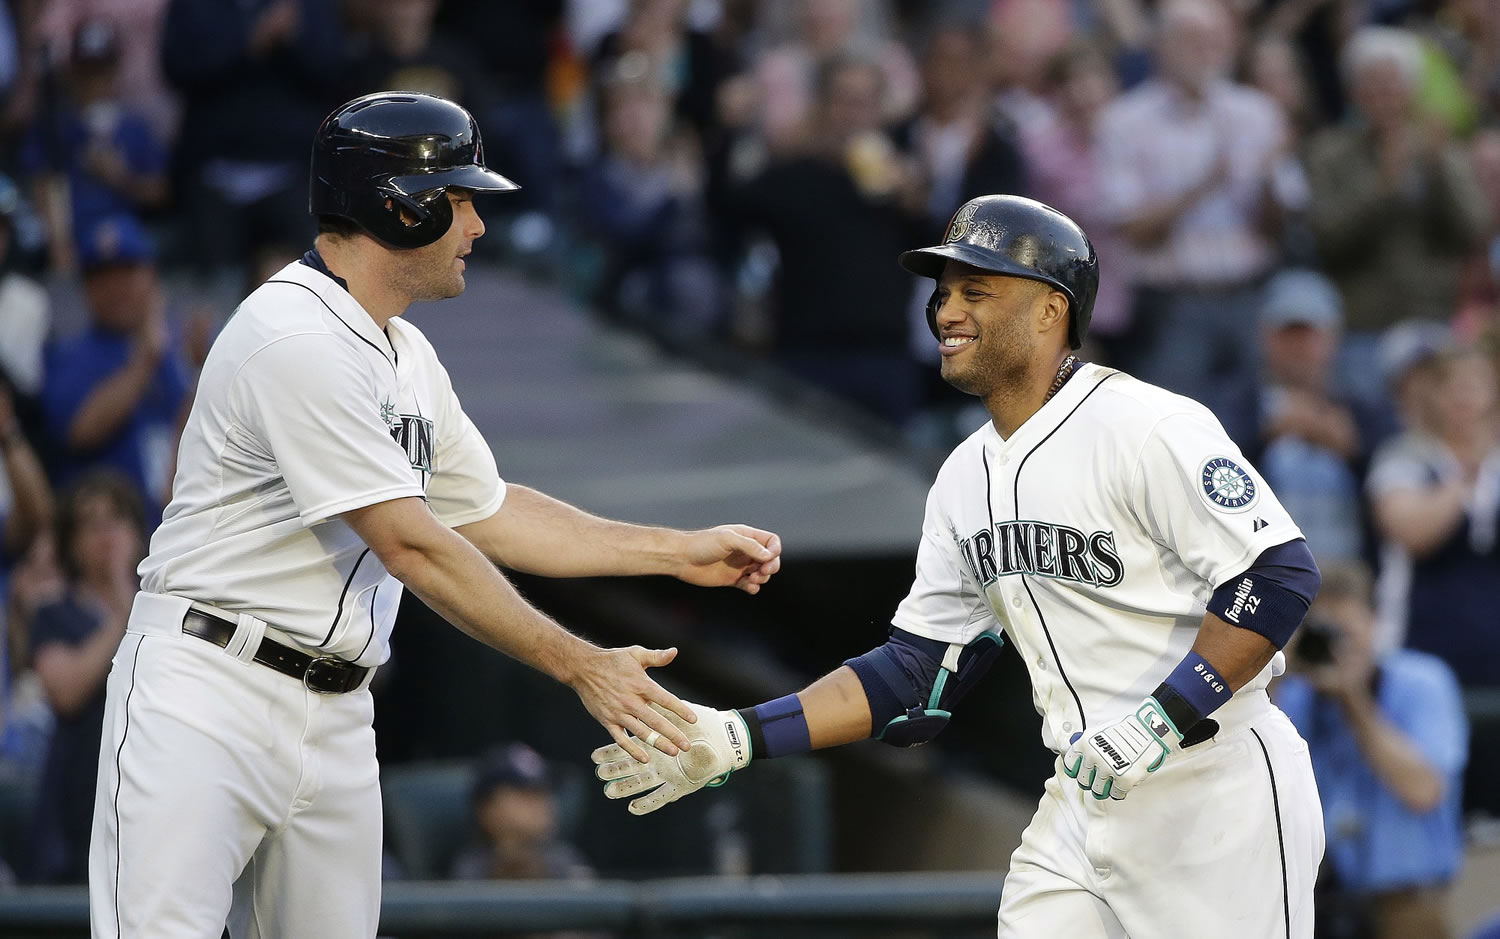 Seattle Mariners' Robinson Cano, right, is congratulated by Seth Smith after Cano's home run in the third inning Saturday, May 30, 2015, in Seattle.